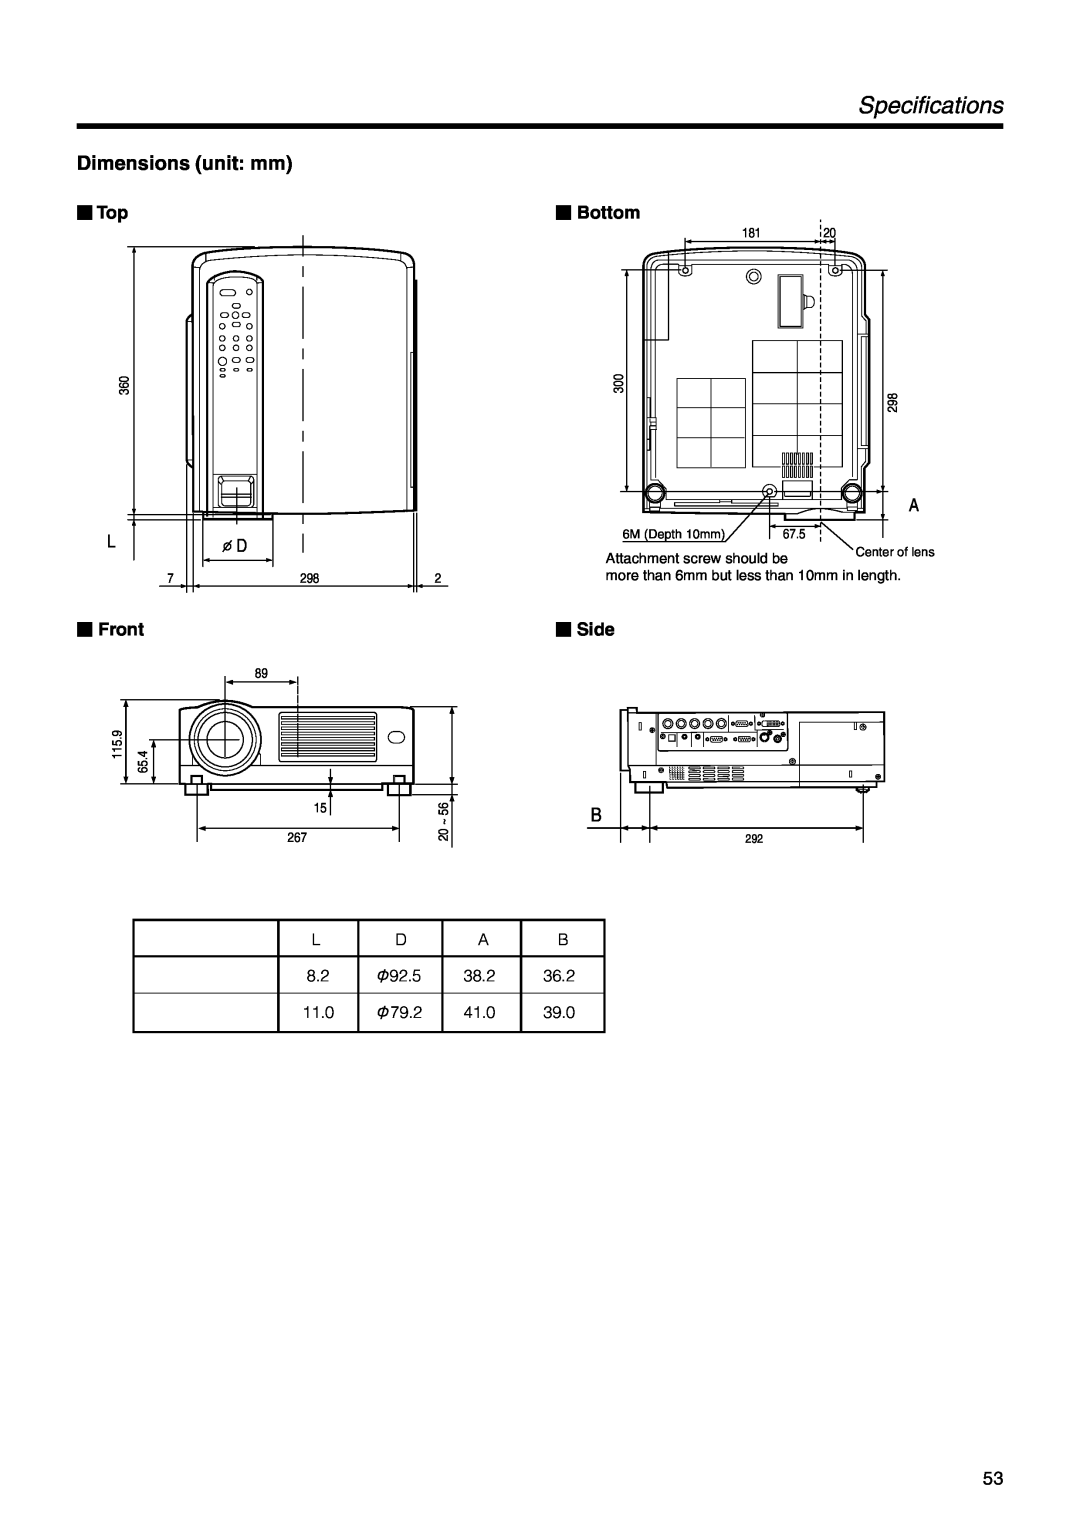 Dukane 28A9017 user manual Specifications, Dimensions unit mm,  Top,  Bottom,  Front,  Side 